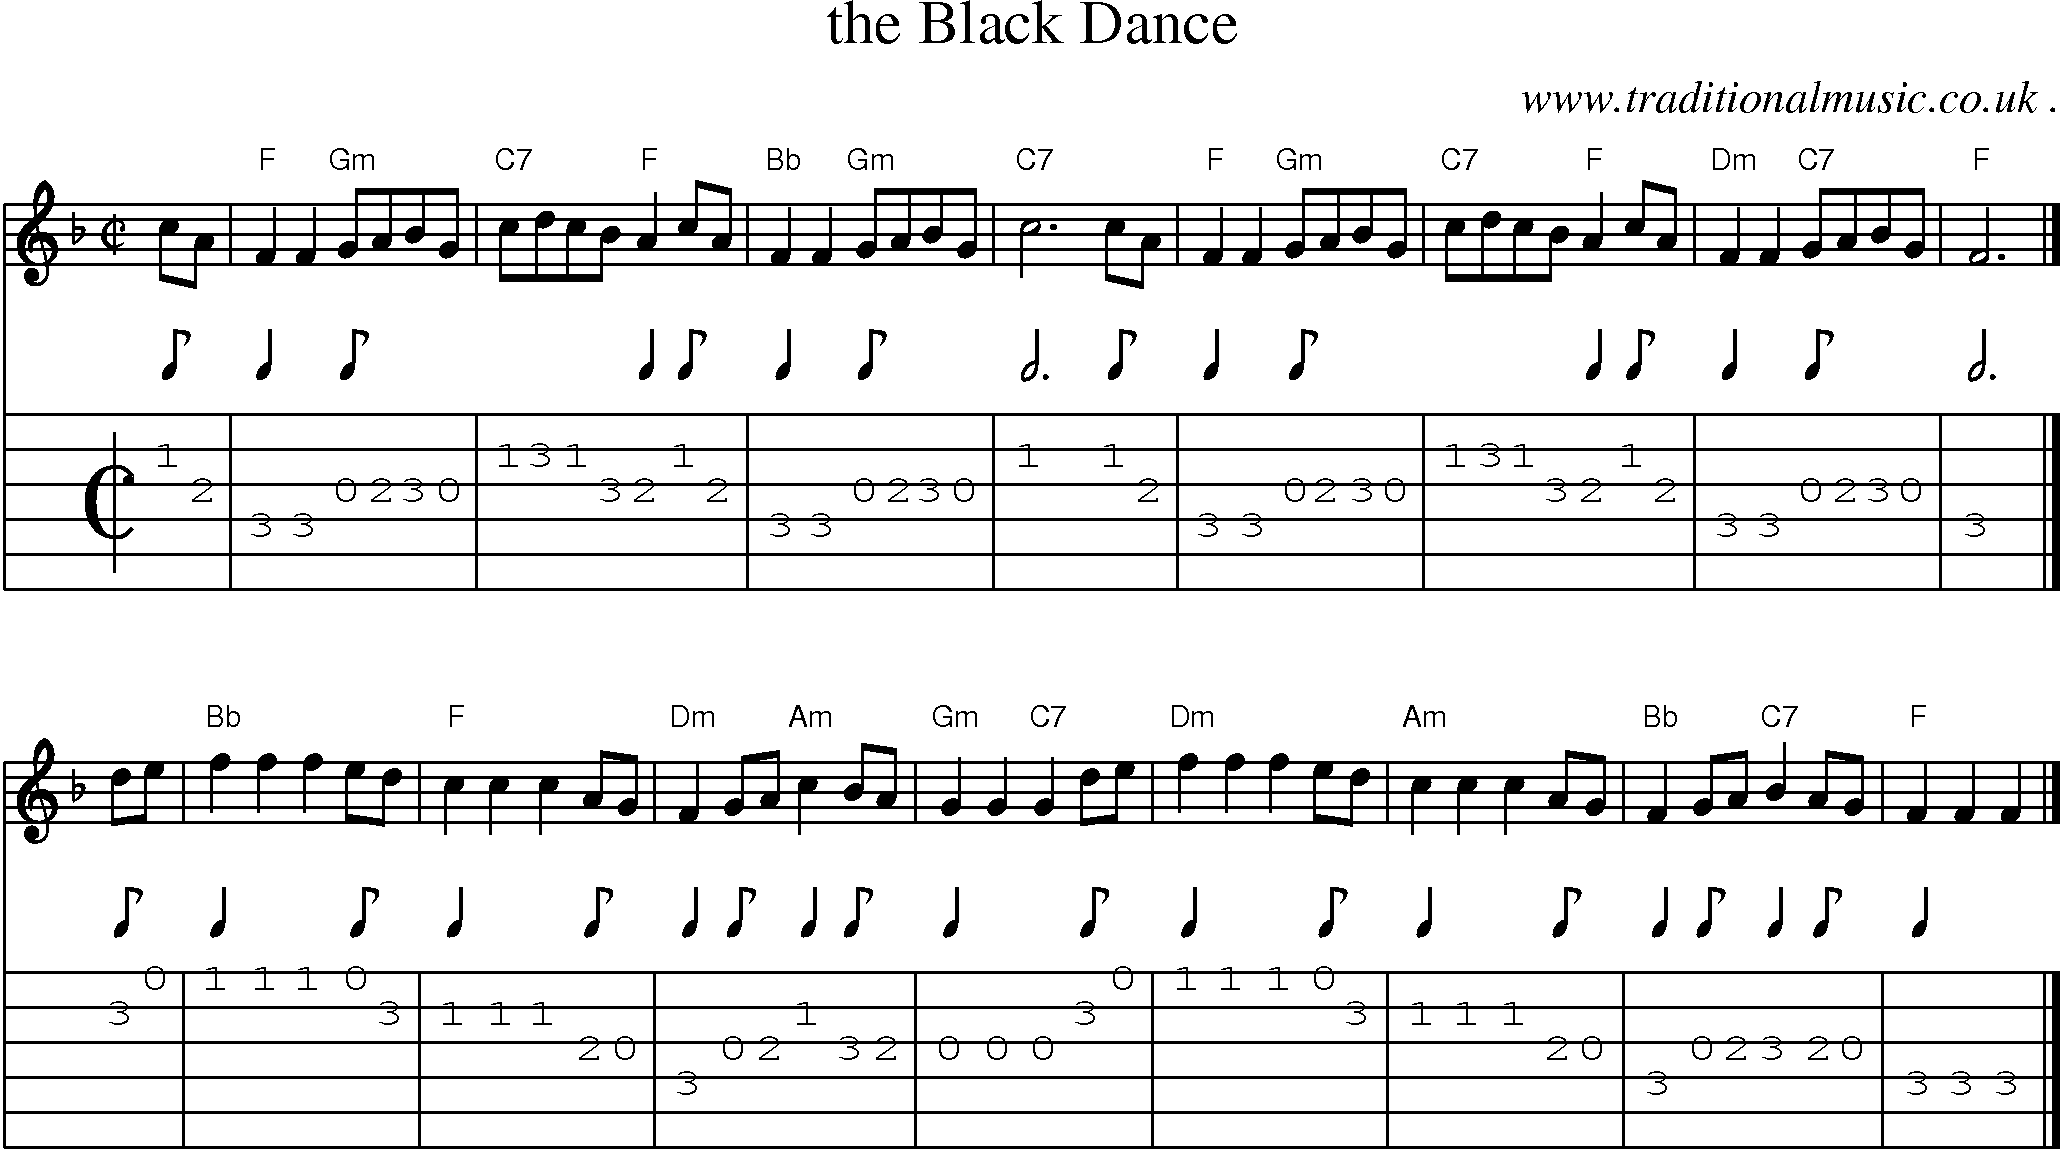 Sheet-music  score, Chords and Guitar Tabs for The Black Dance